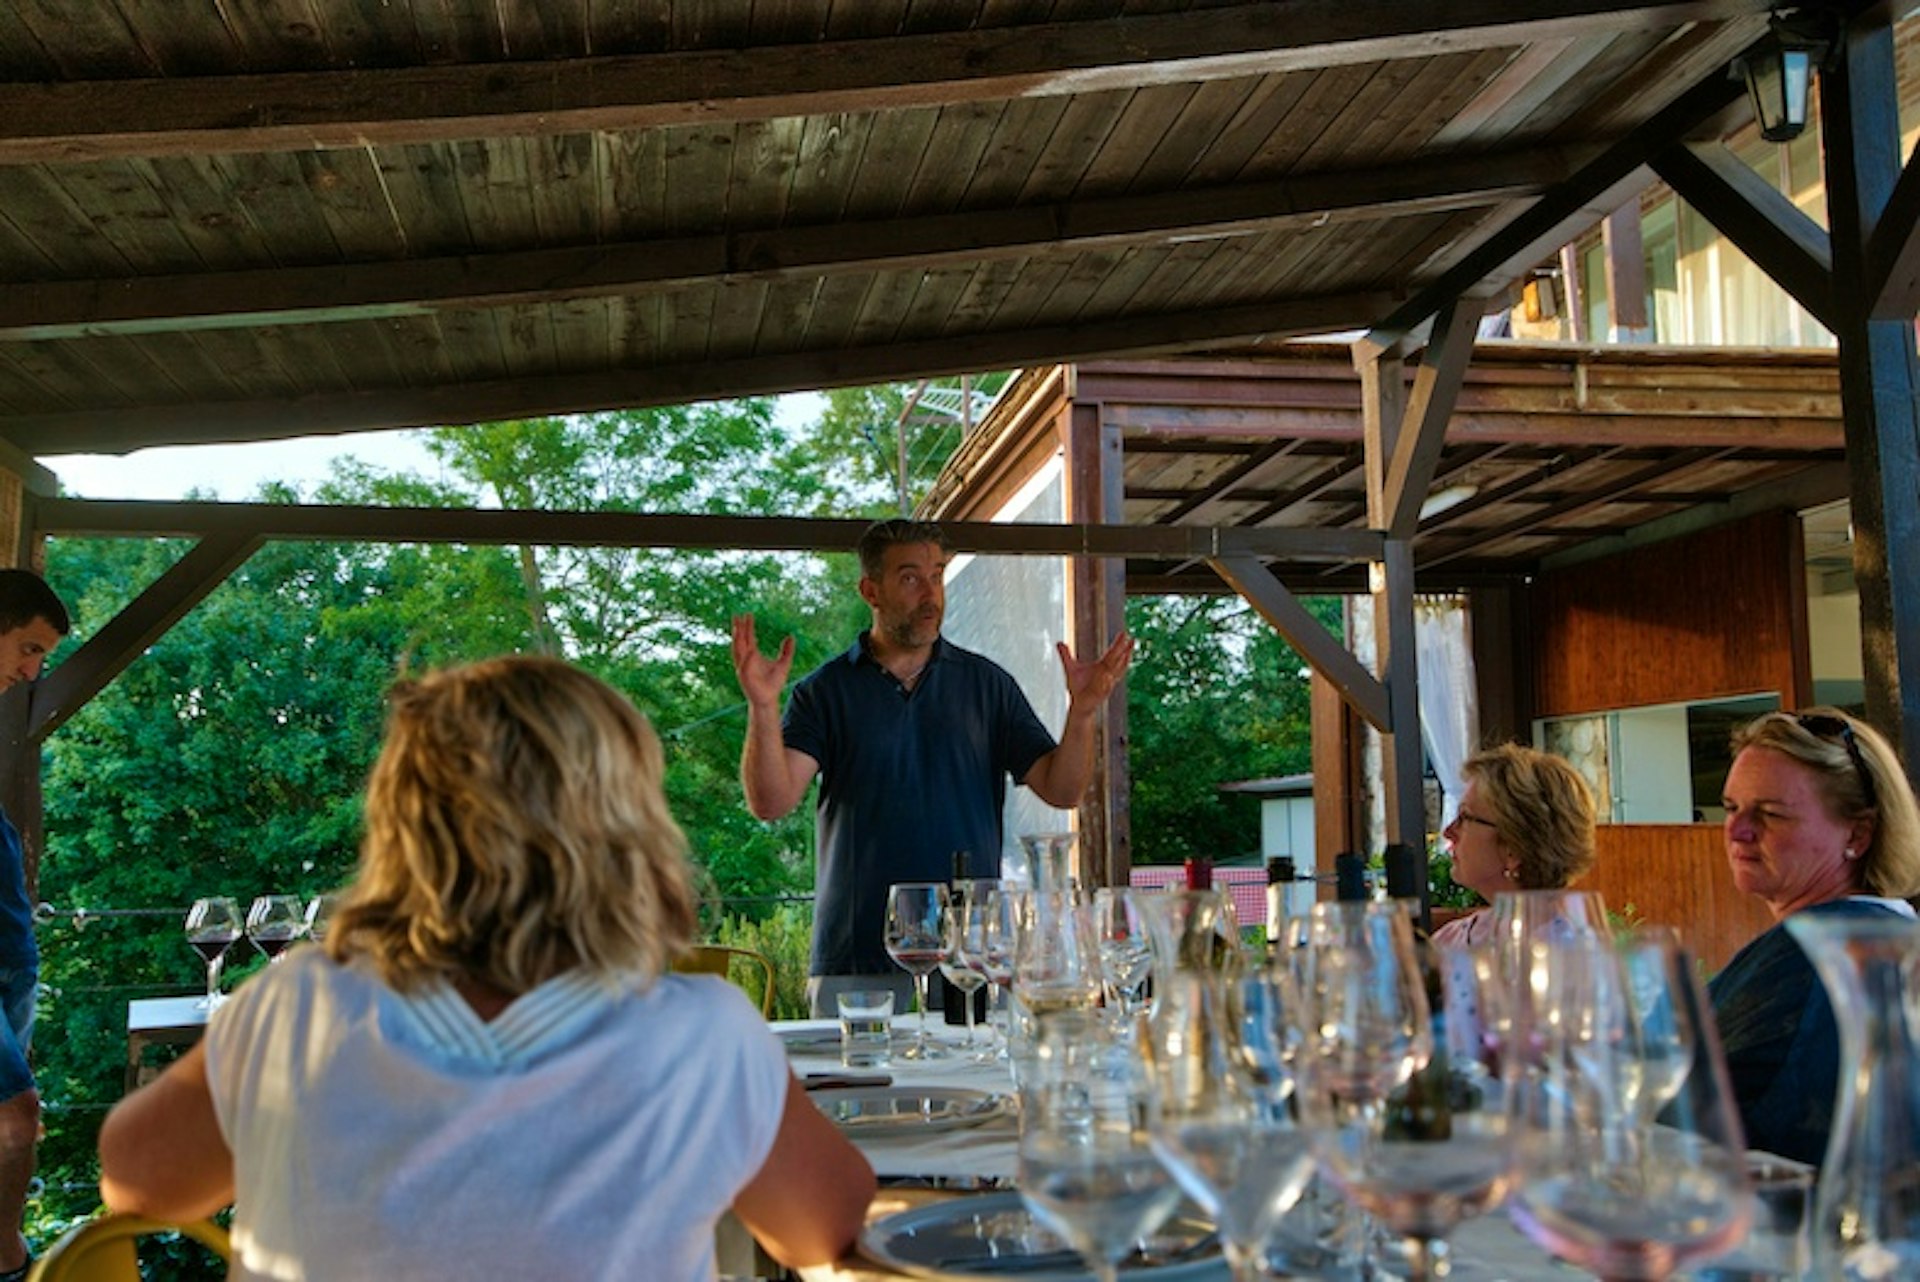 A man stands at the head of a table, arms open, while people sit around. The table is covered in wine glasses and a white tablecloth.